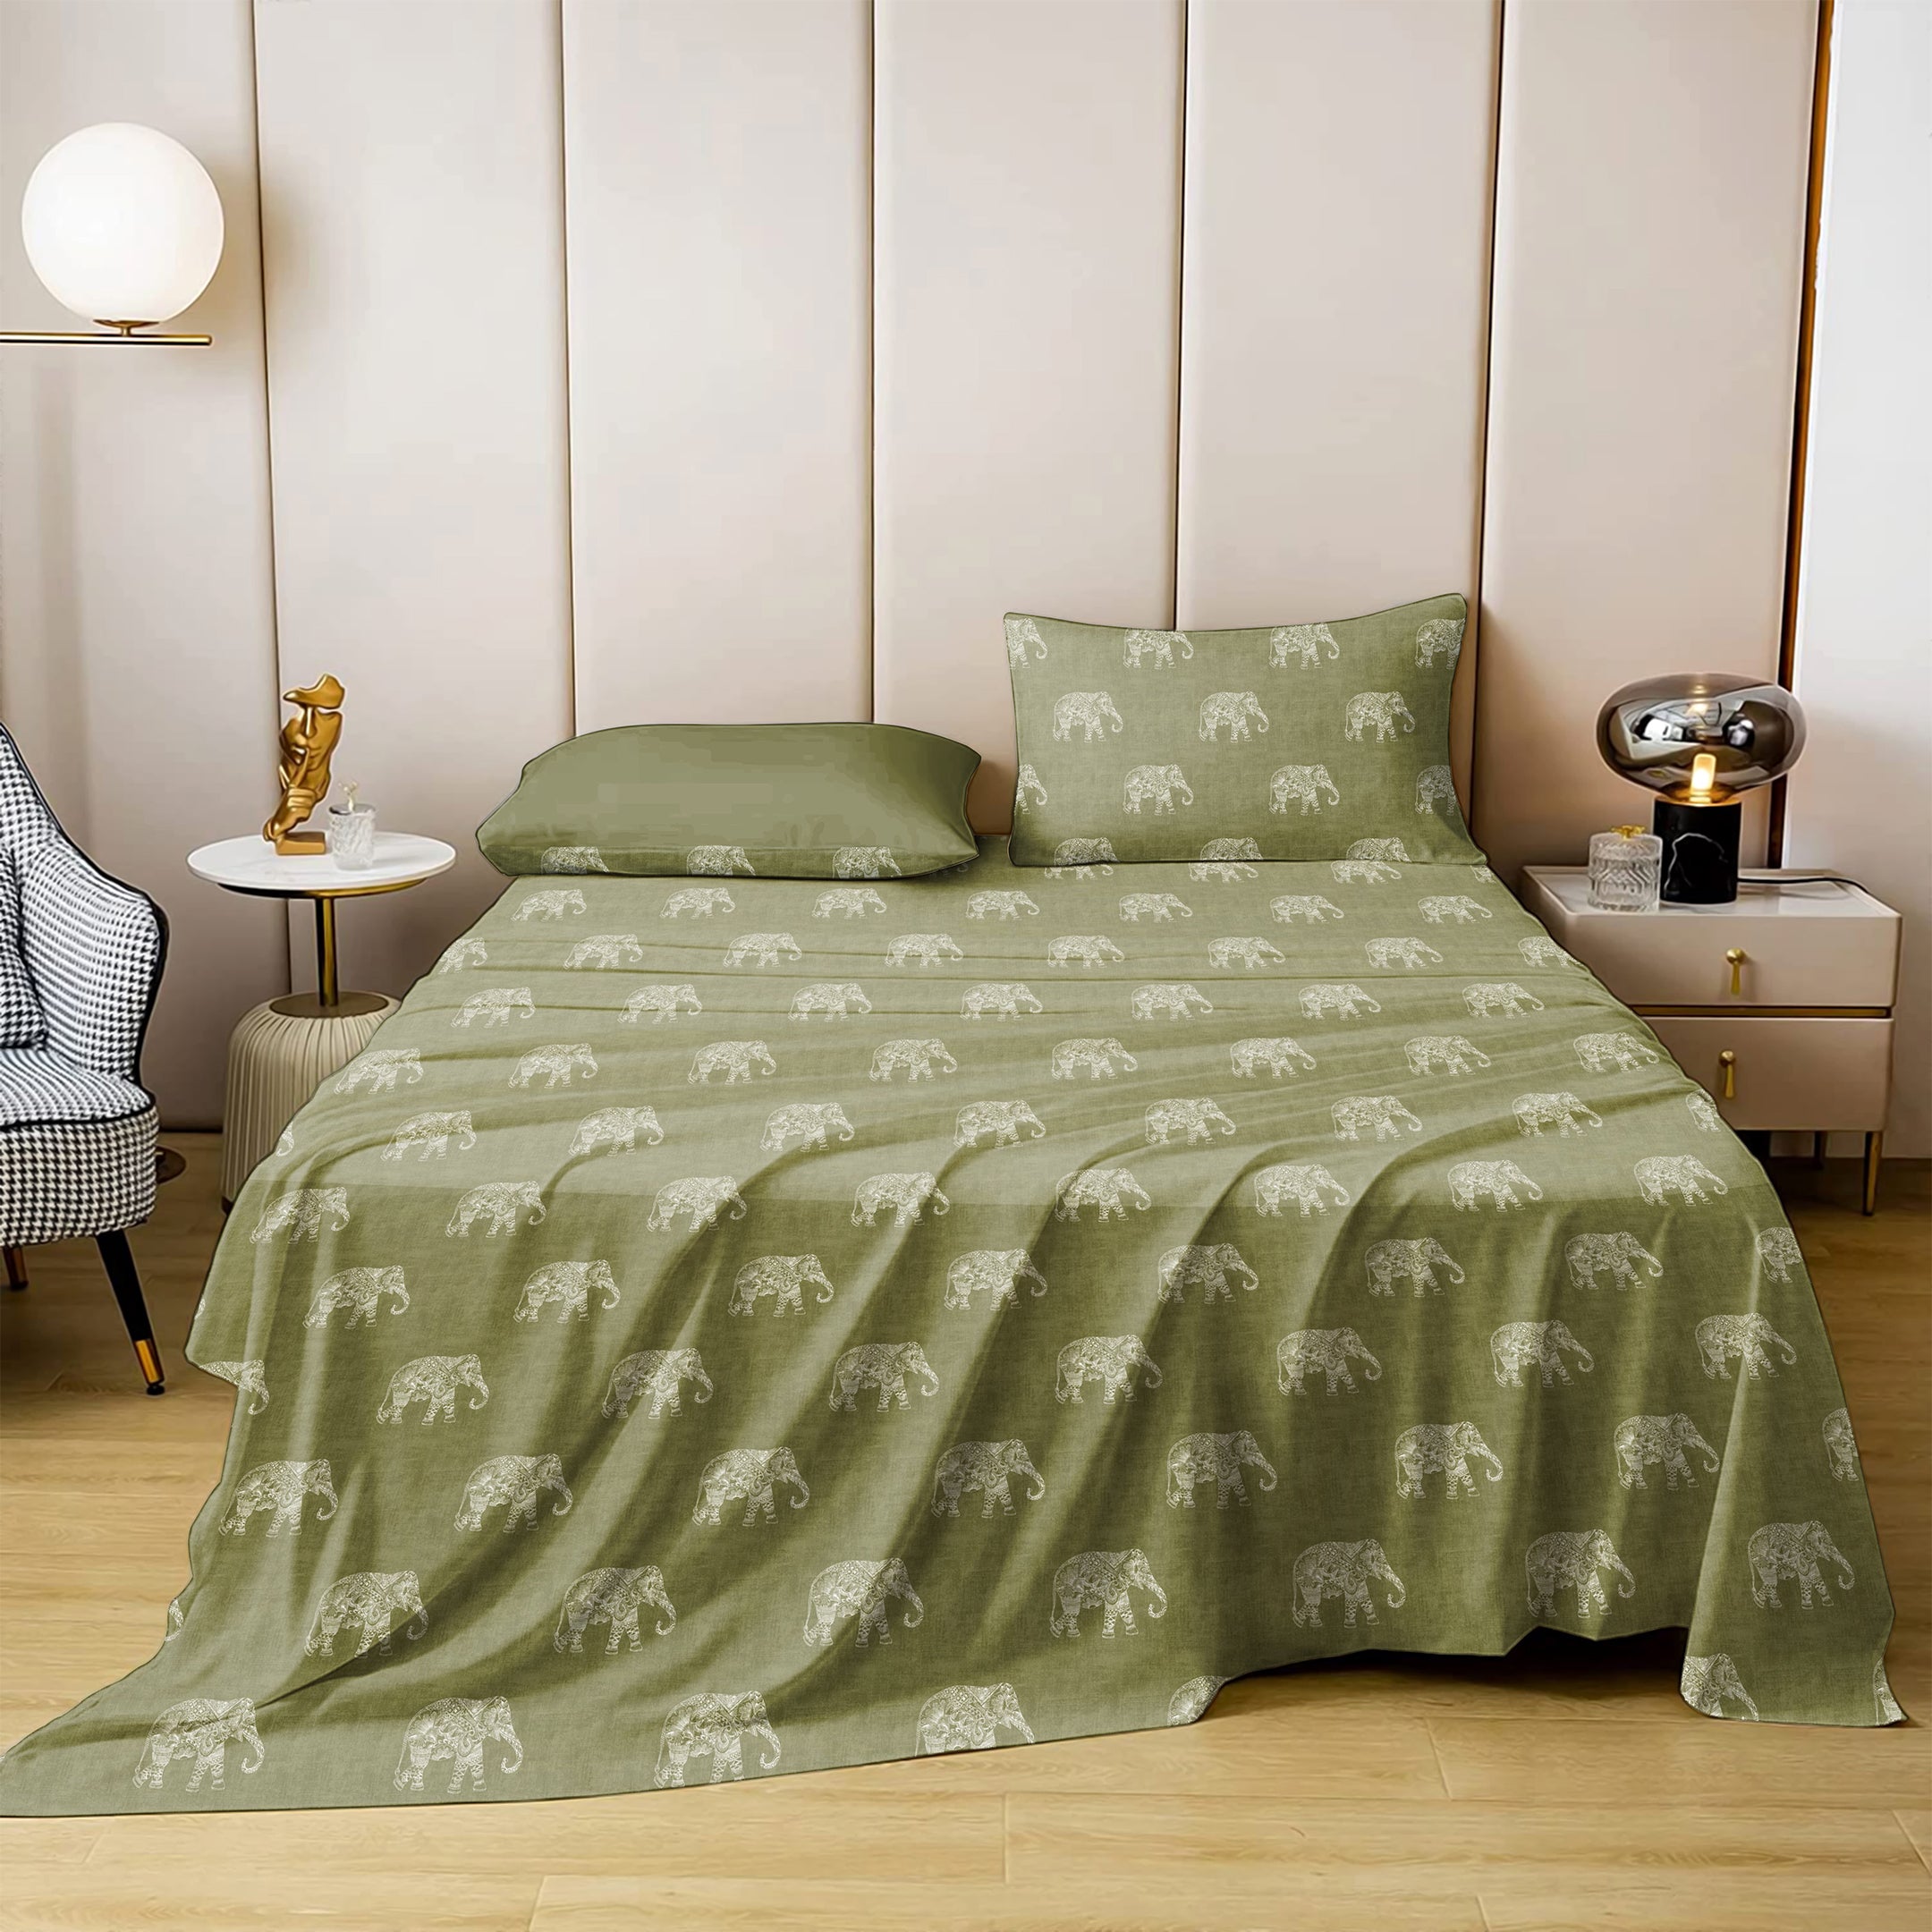 Jodhpur Elephant Bedsheet for Double Bed with 2 PillowCovers King Size (104" X 90") Olive